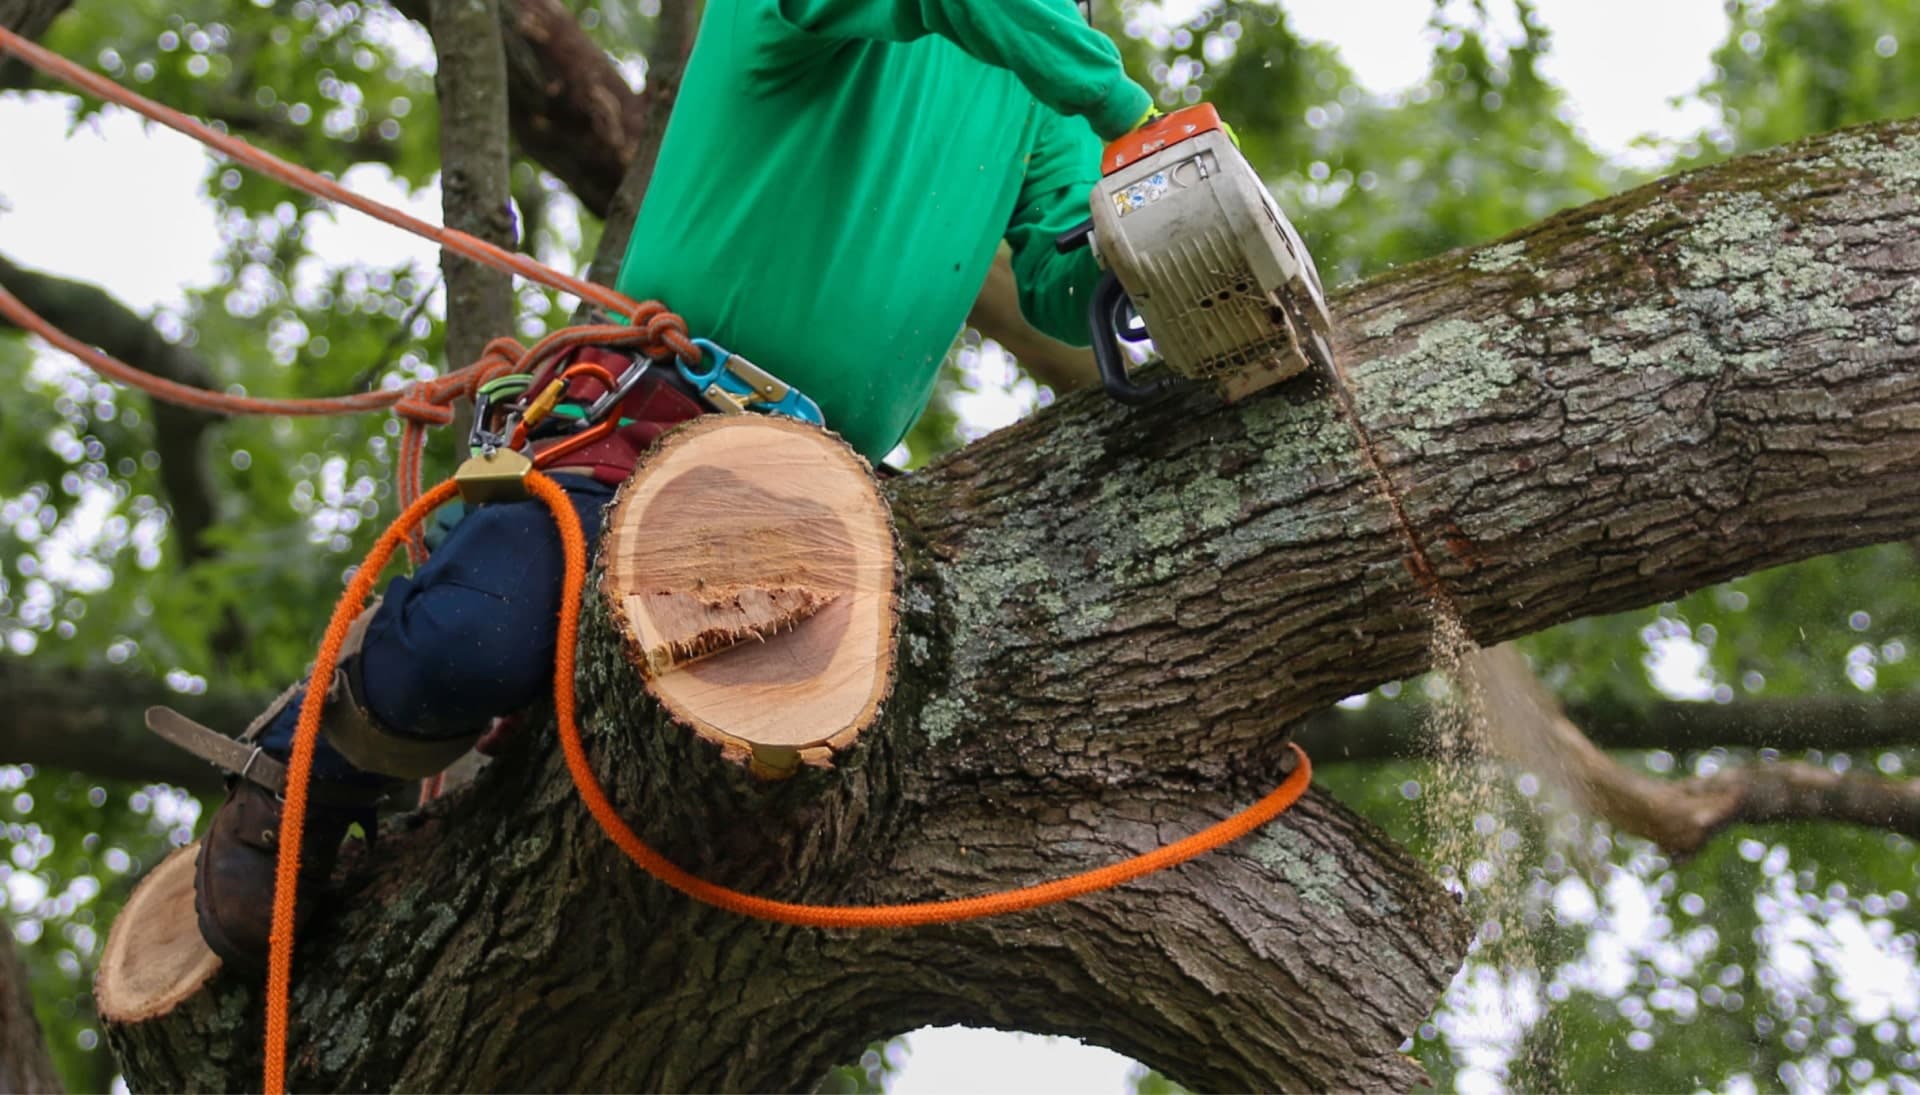 Shed your worries away with best tree removal in Santa Rosa